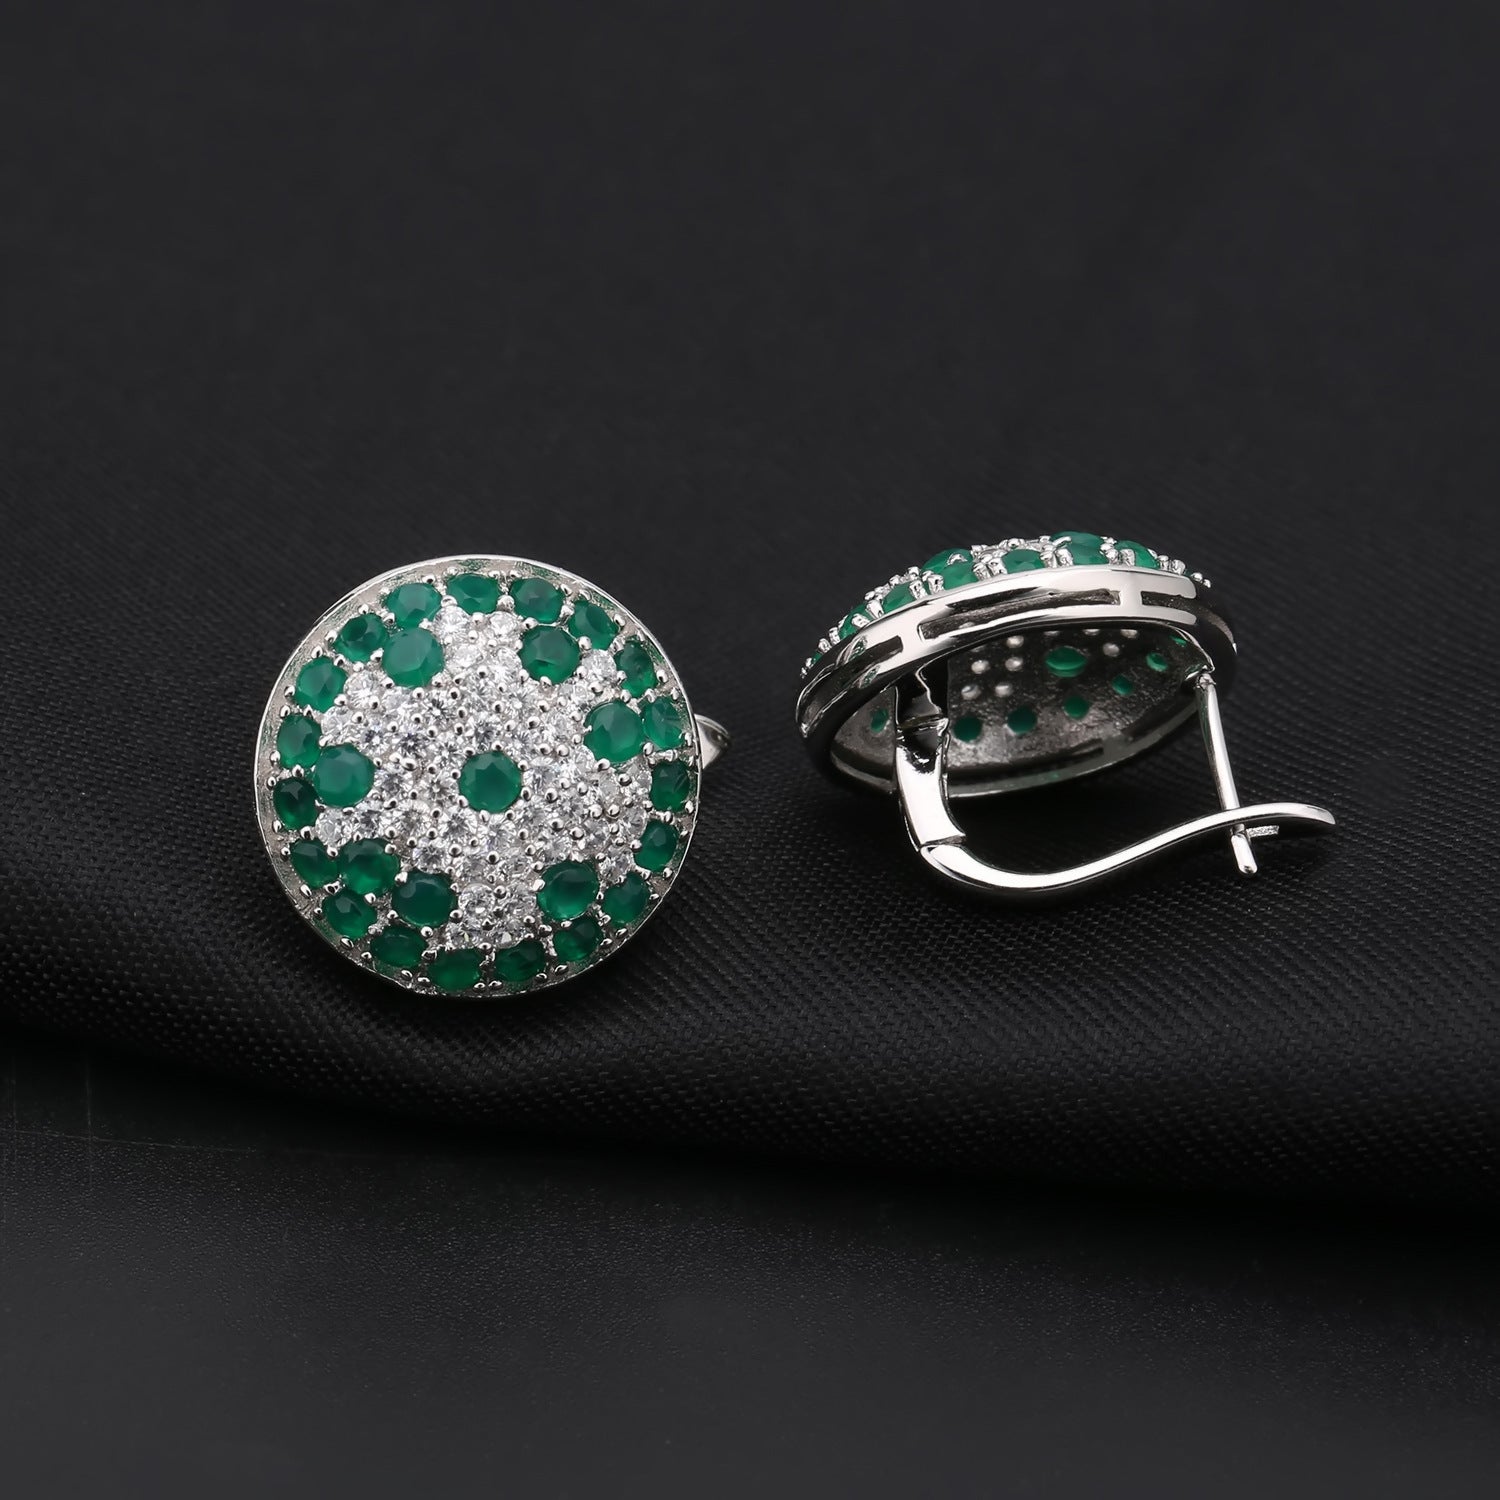 European Vintage Style Group Inlaid Natural Green Agate Circle Sterling Studs Earrings for Women